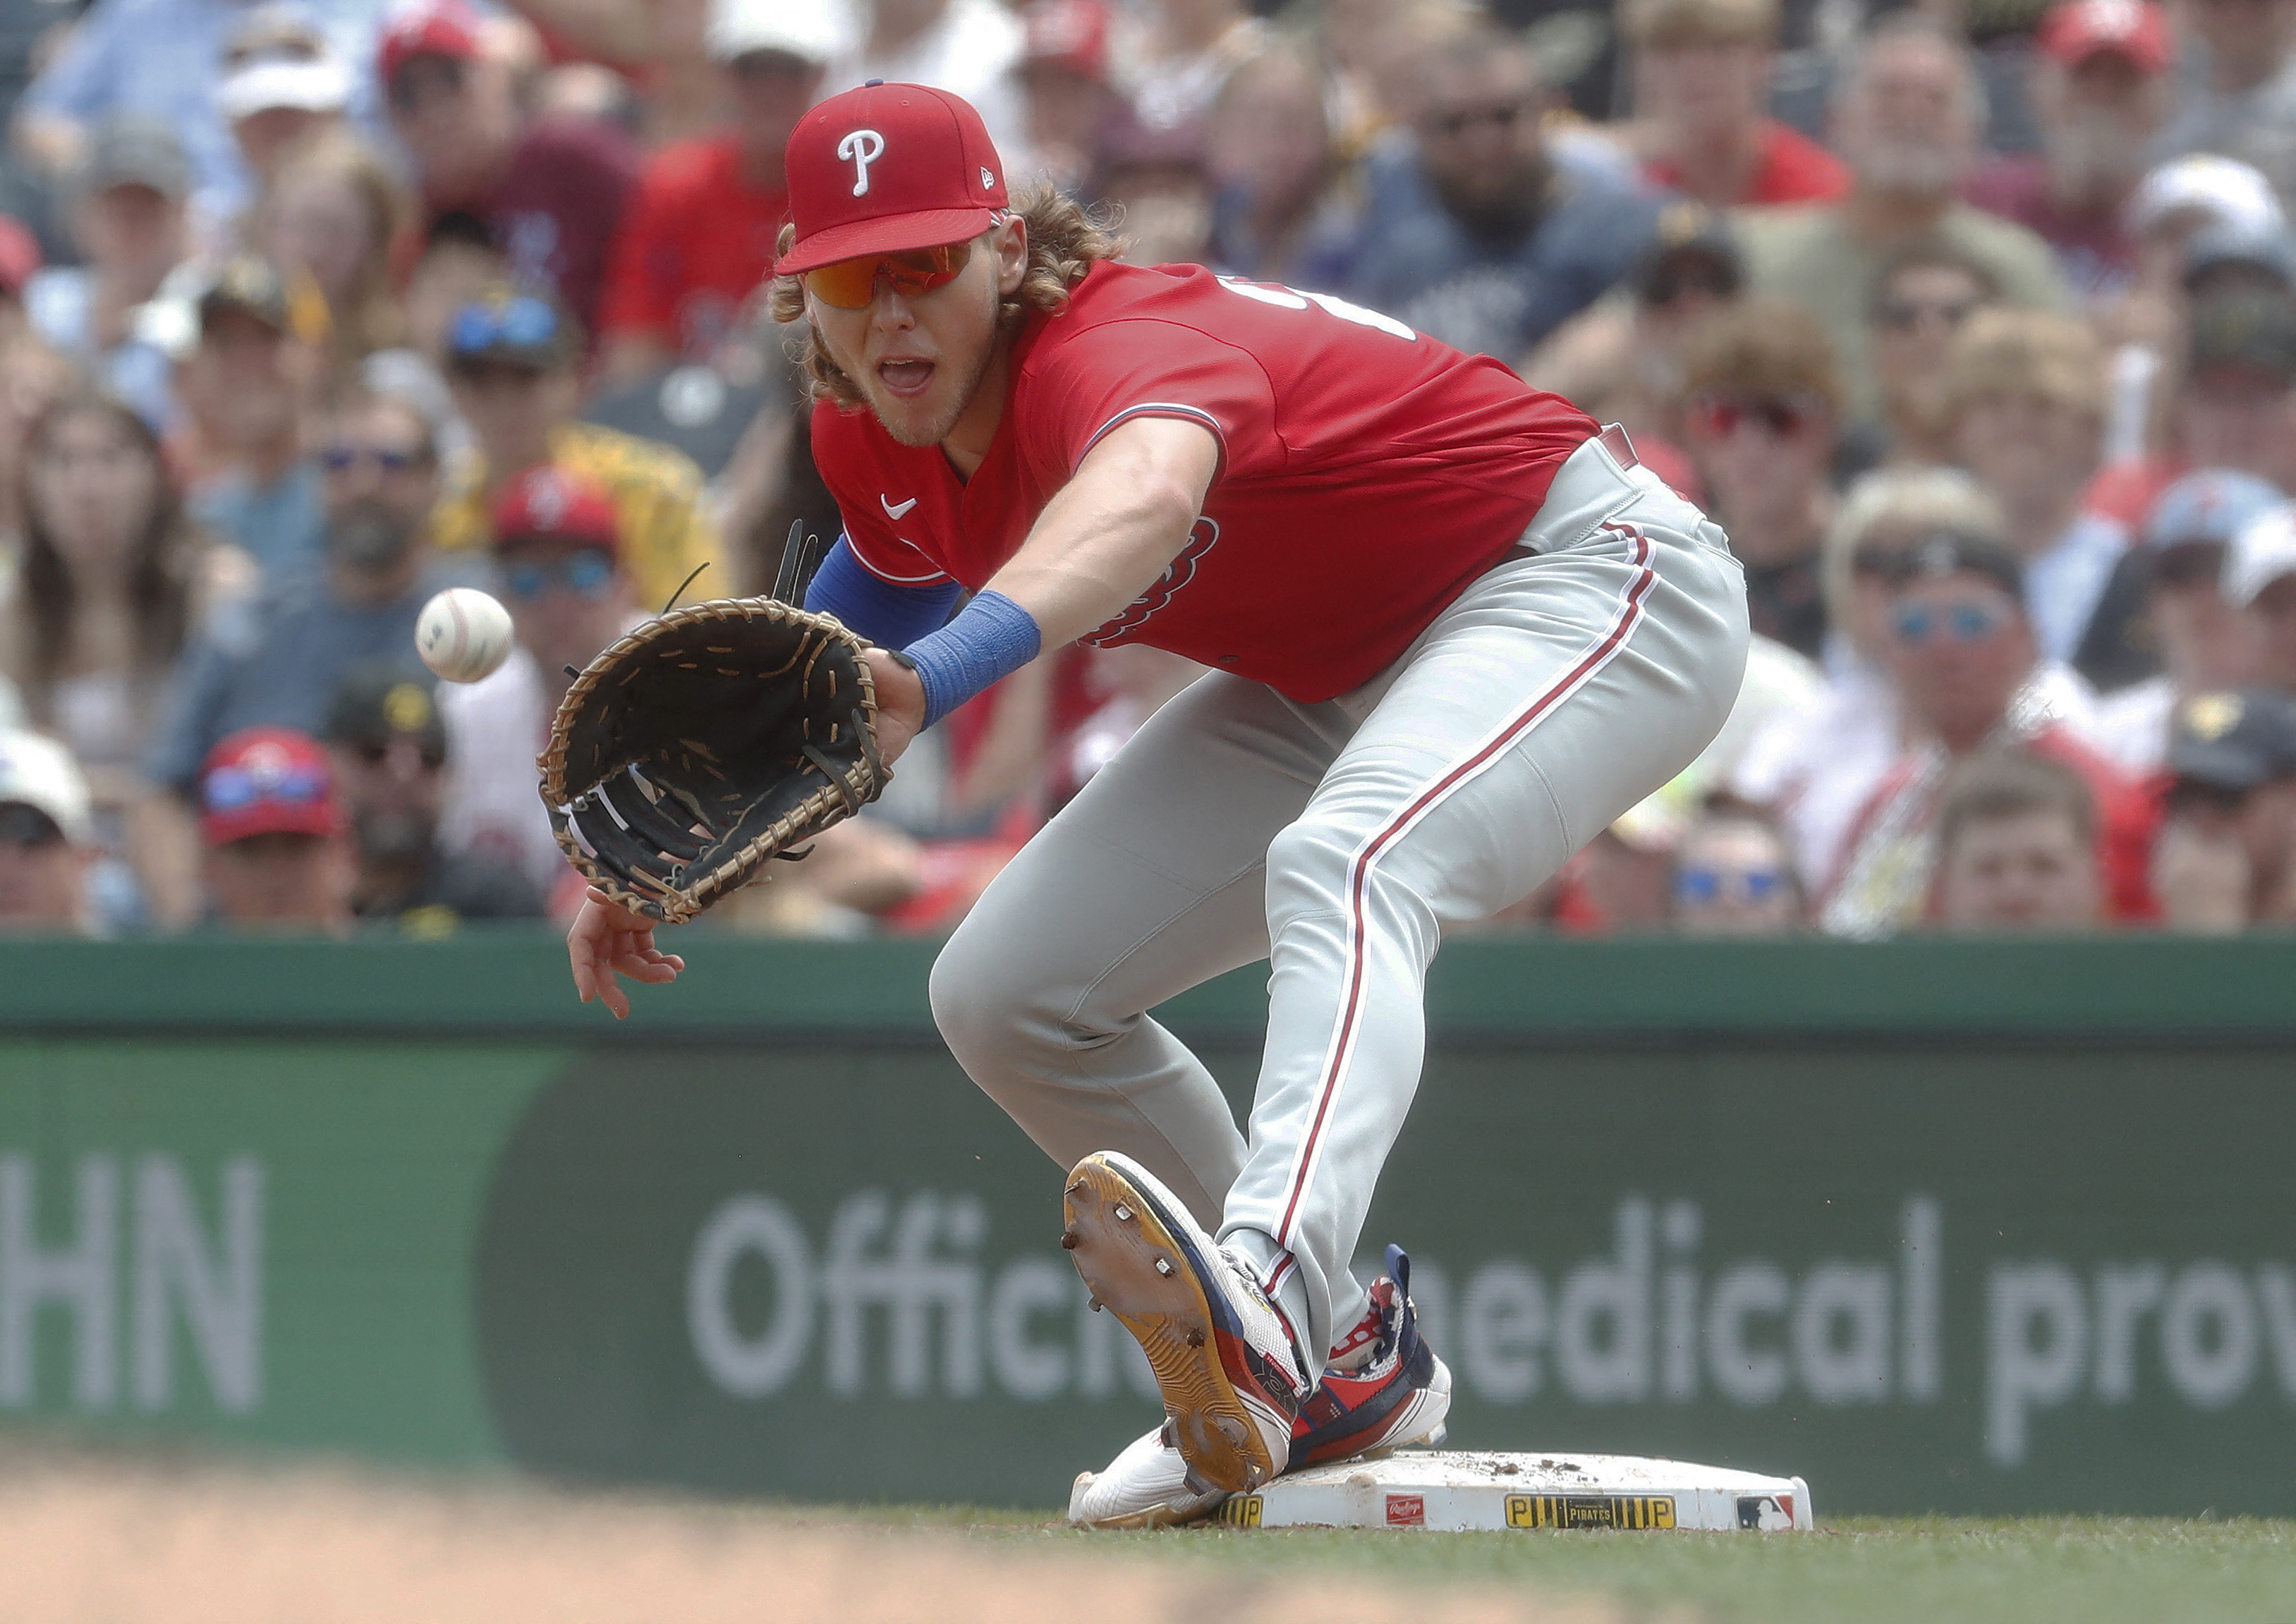 Surging Phillies win 5th in a row, rally past Nationals 12-6 – Daily Local